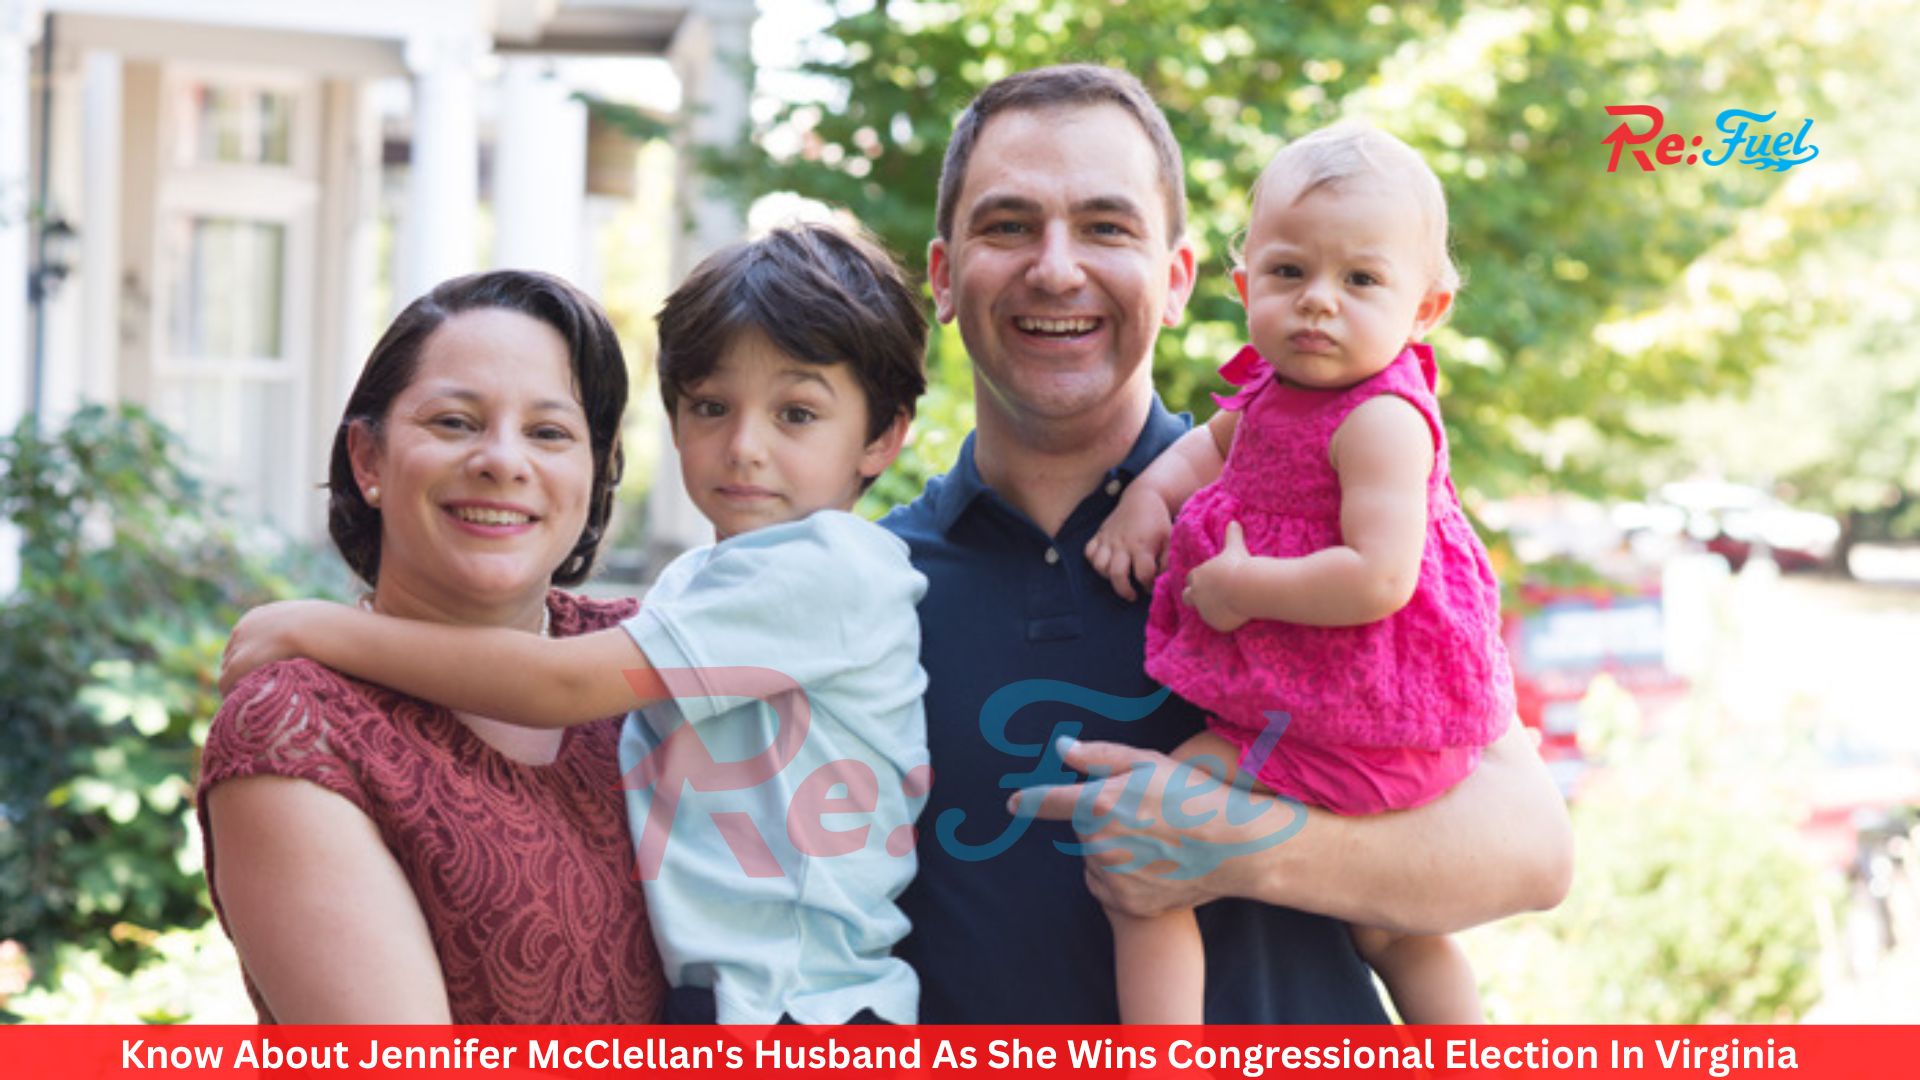 Know About Jennifer McClellan's Husband As She Wins Congressional Election In Virginia